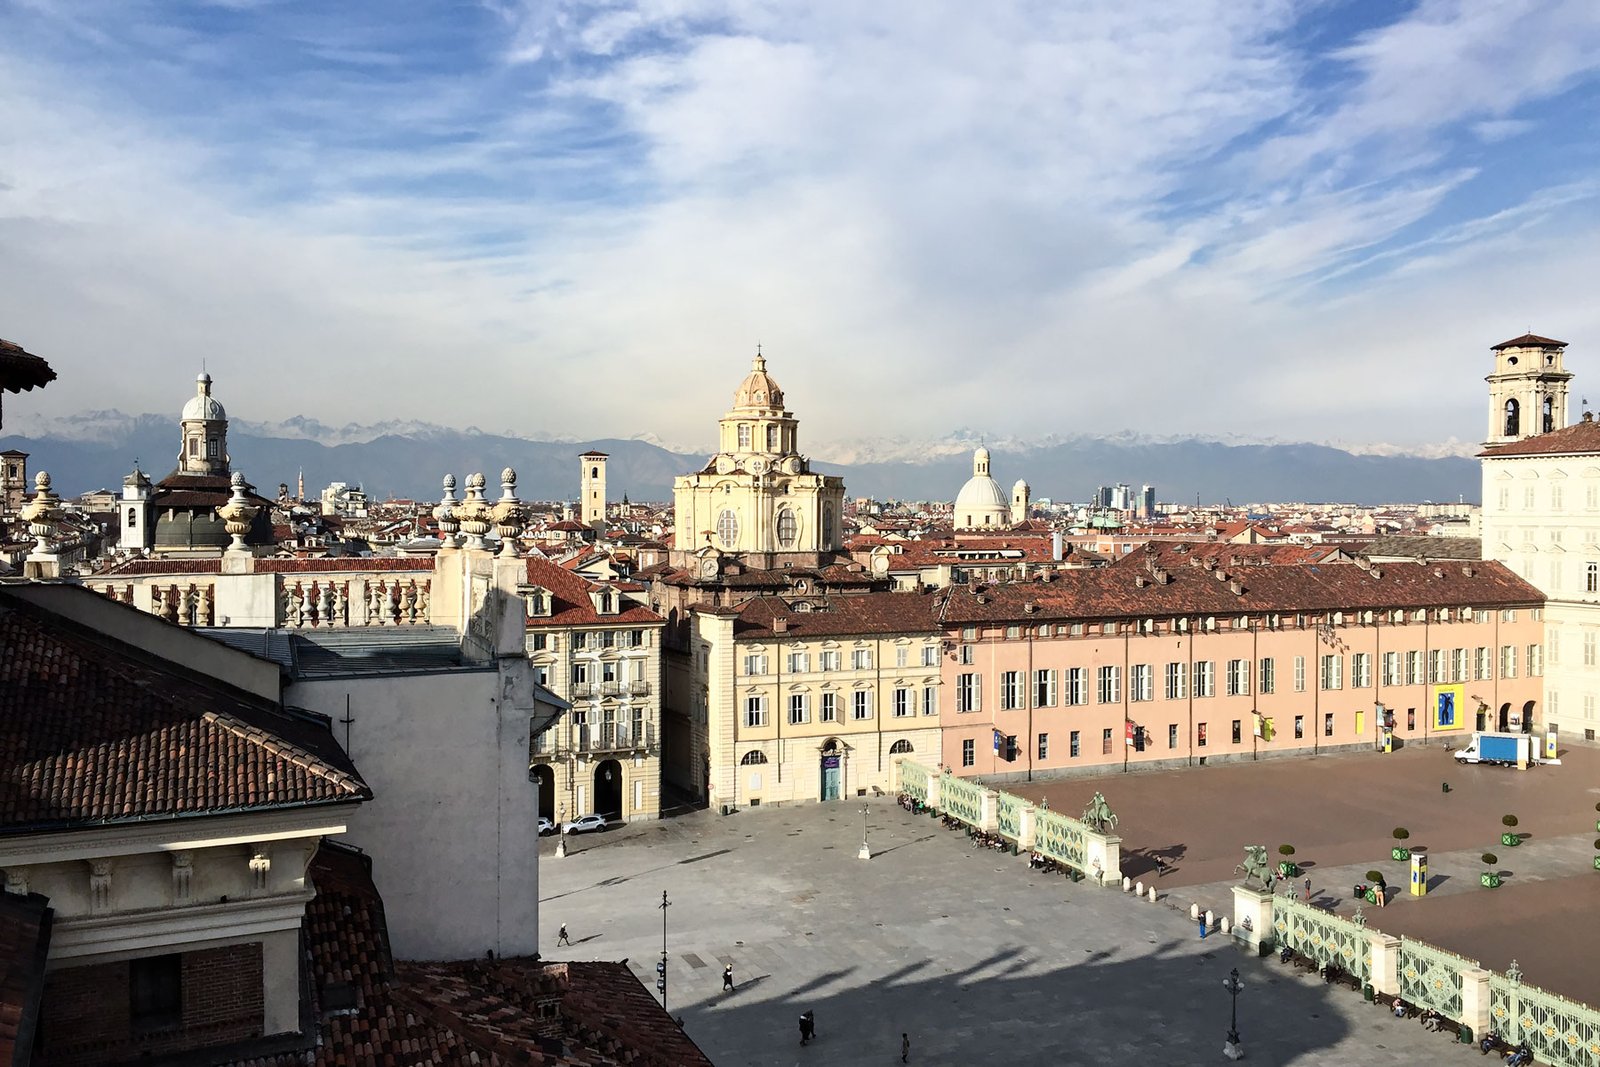 The panoramic view from the tower of Palazzo Madama in Turin.